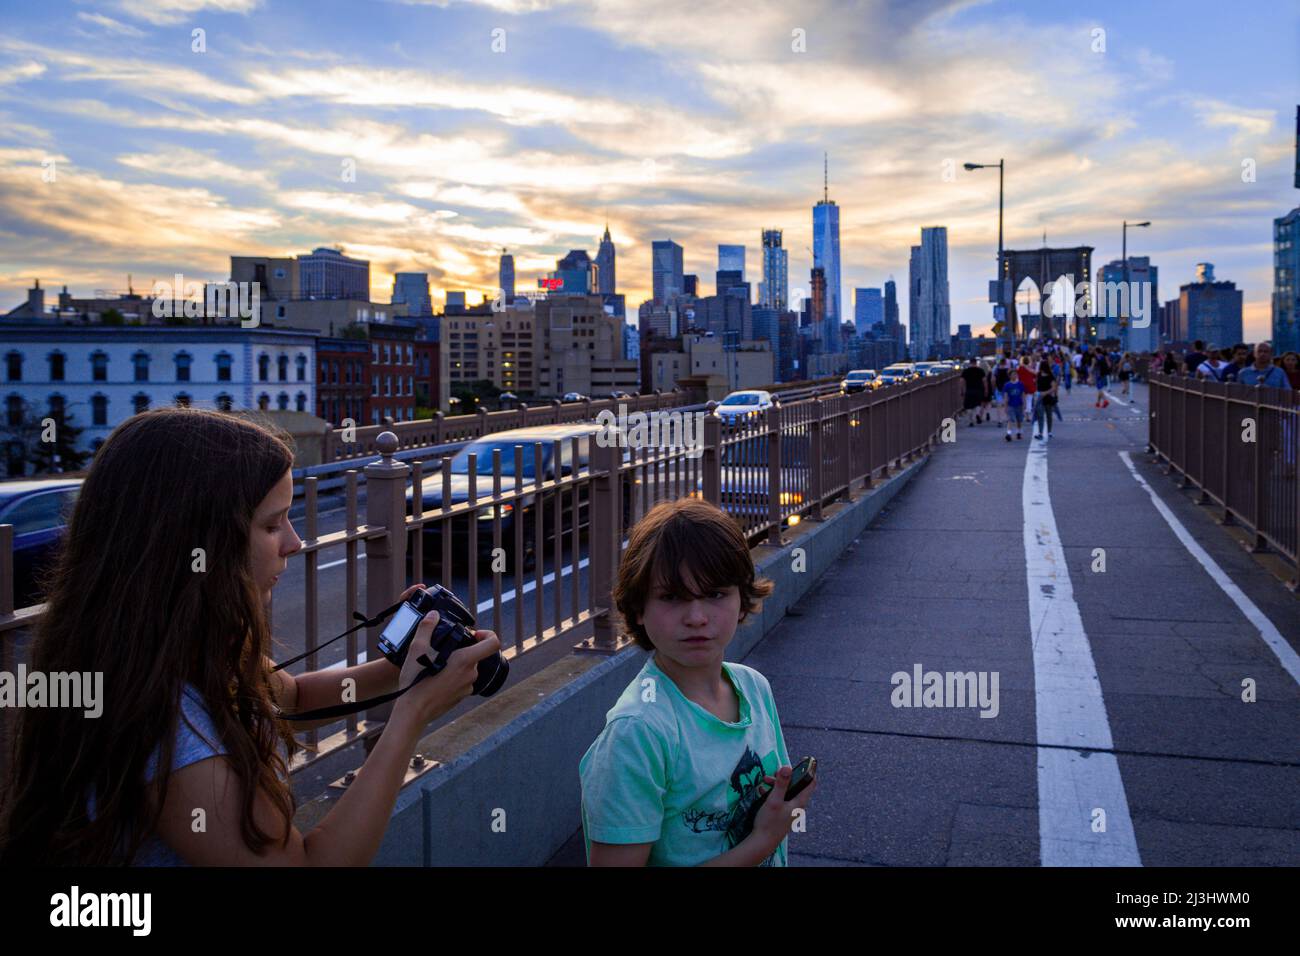 ANCHORAGE PLAZA, New York City, NY, USA, Two kids on Brooklyn Bridge over East River 14 years old caucasian teenager girl and 12 years old caucasian teenager boy - both with brown hair and summer styling on Brooklyn Bridge in the evening Stock Photo